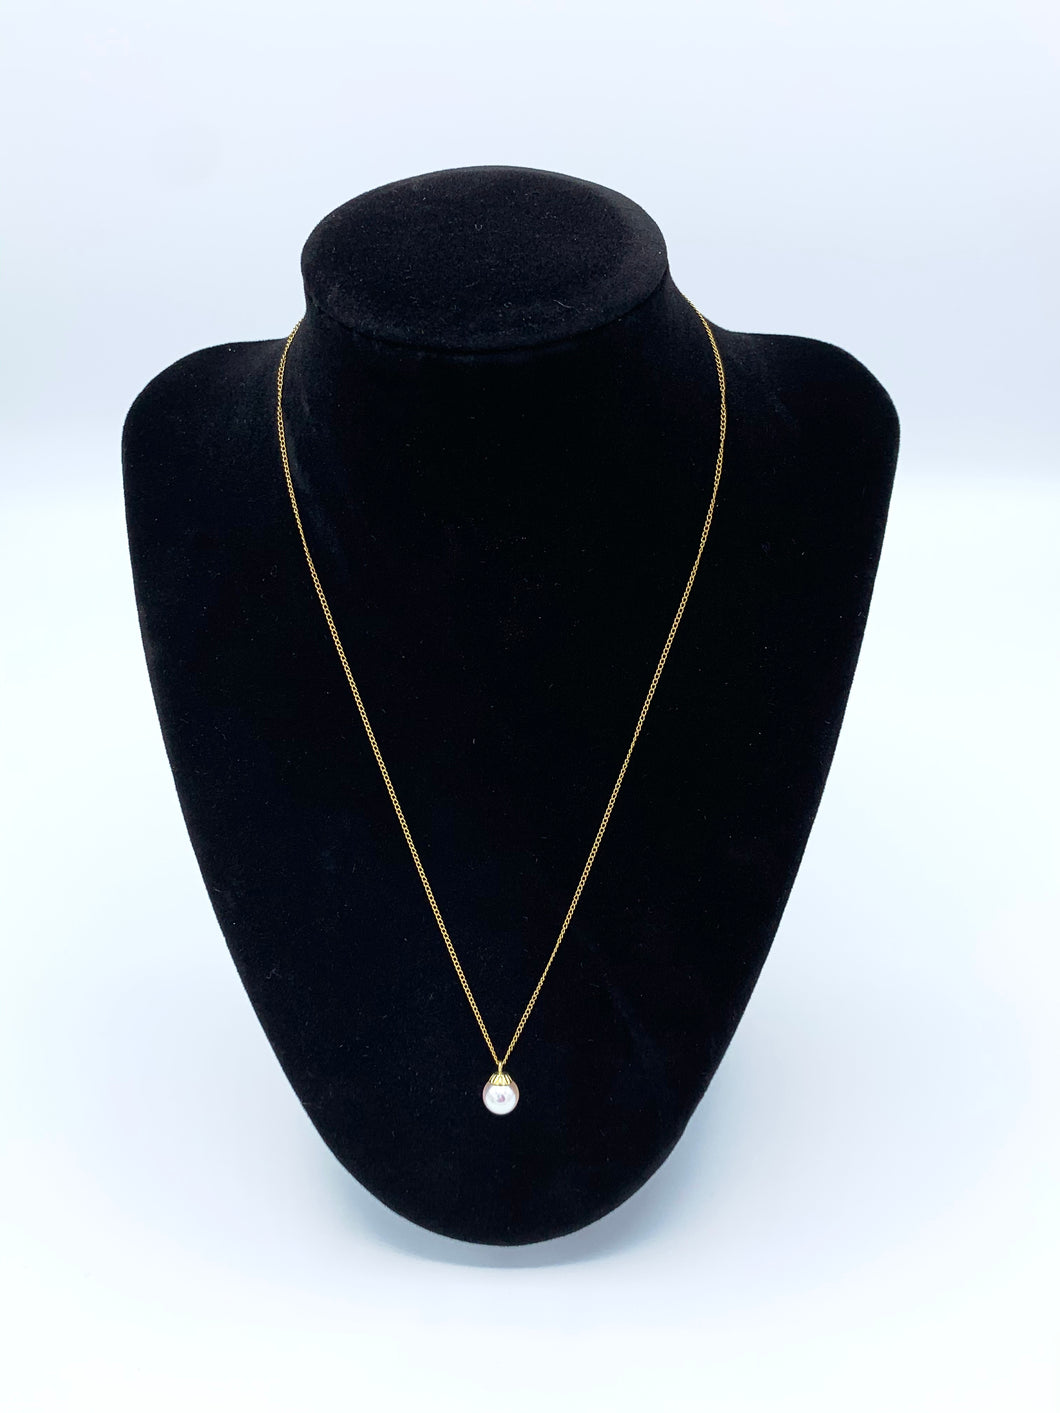 Fresh Water White Pearl Curb Link Necklace